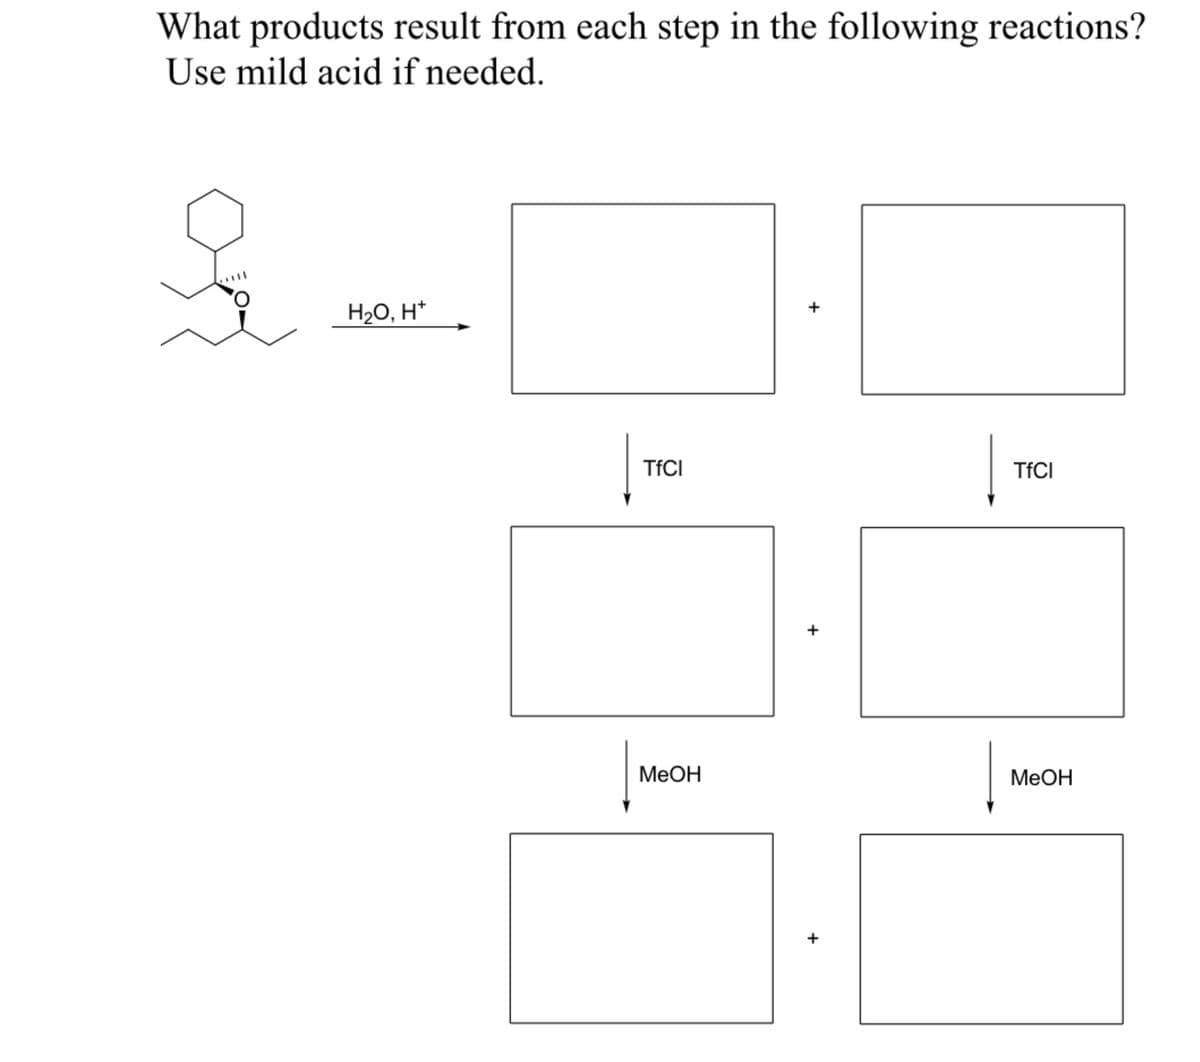 What products result from each step in the following reactions?
Use mild acid if needed.
q
H₂O, H+
TfCl
MeOH
+
+
+
TfCl
MeOH